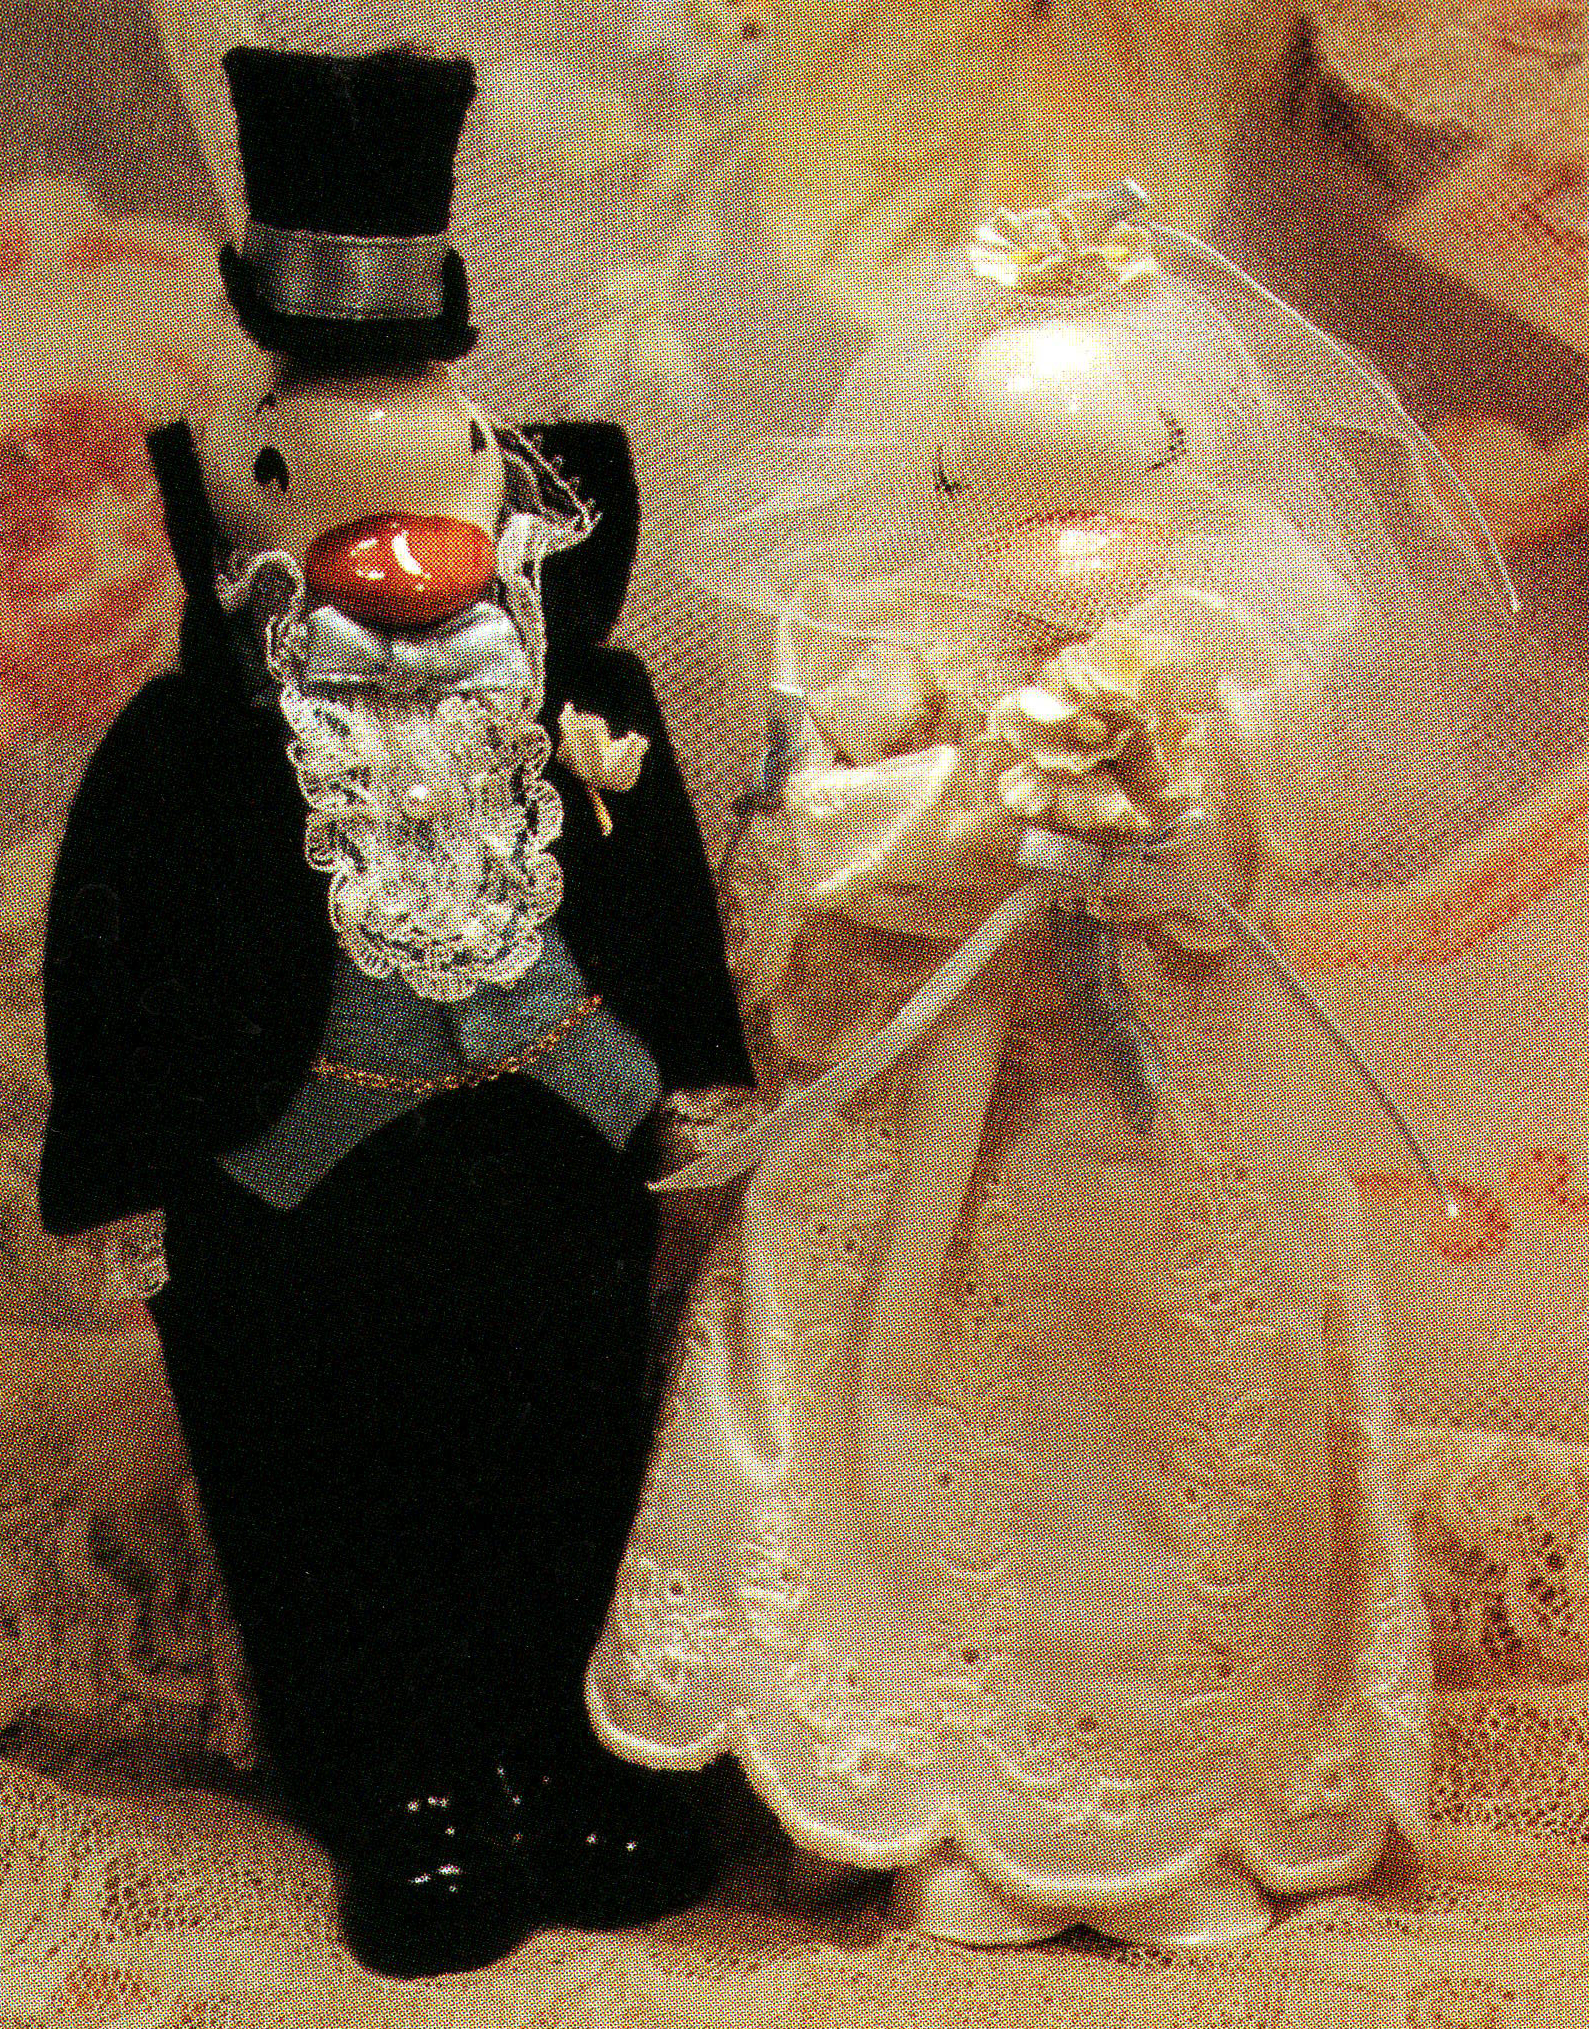 A pair of bride and groom ducks 